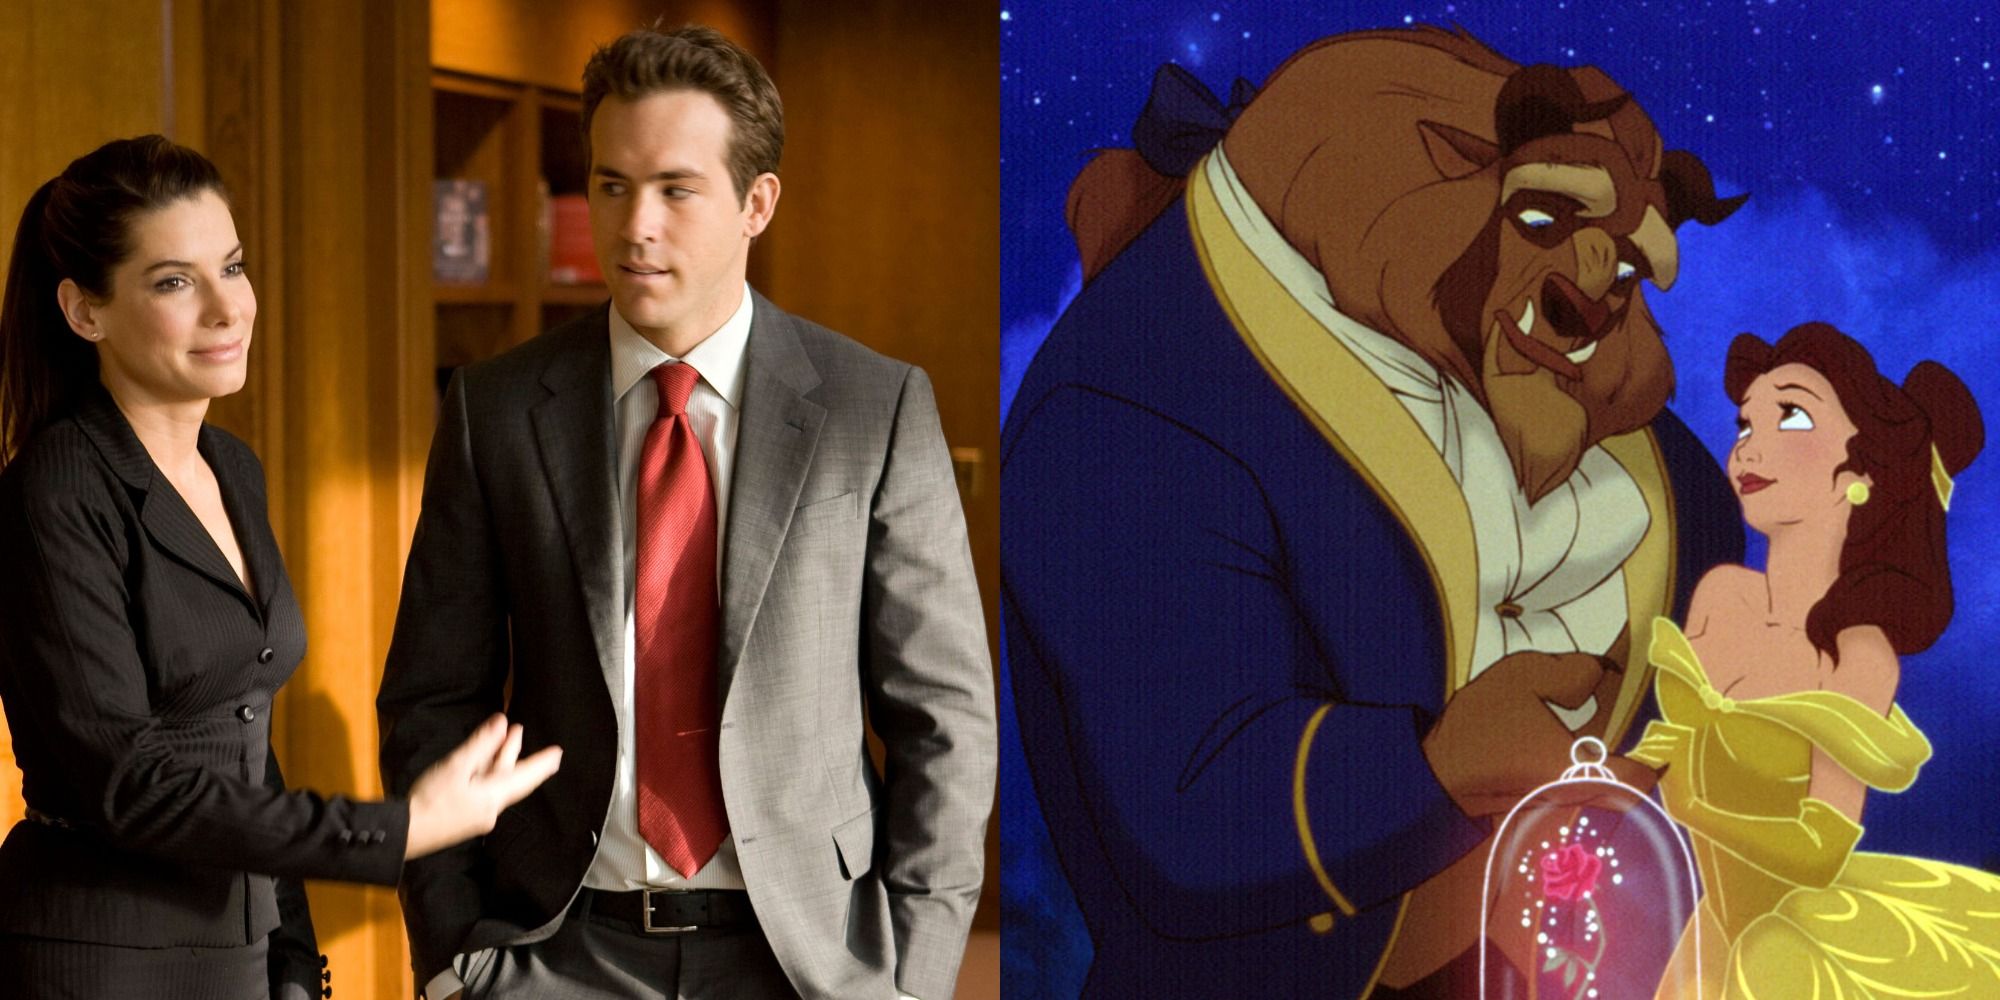 Split image showing the main characters from The Proposal and Beauty & the Beast